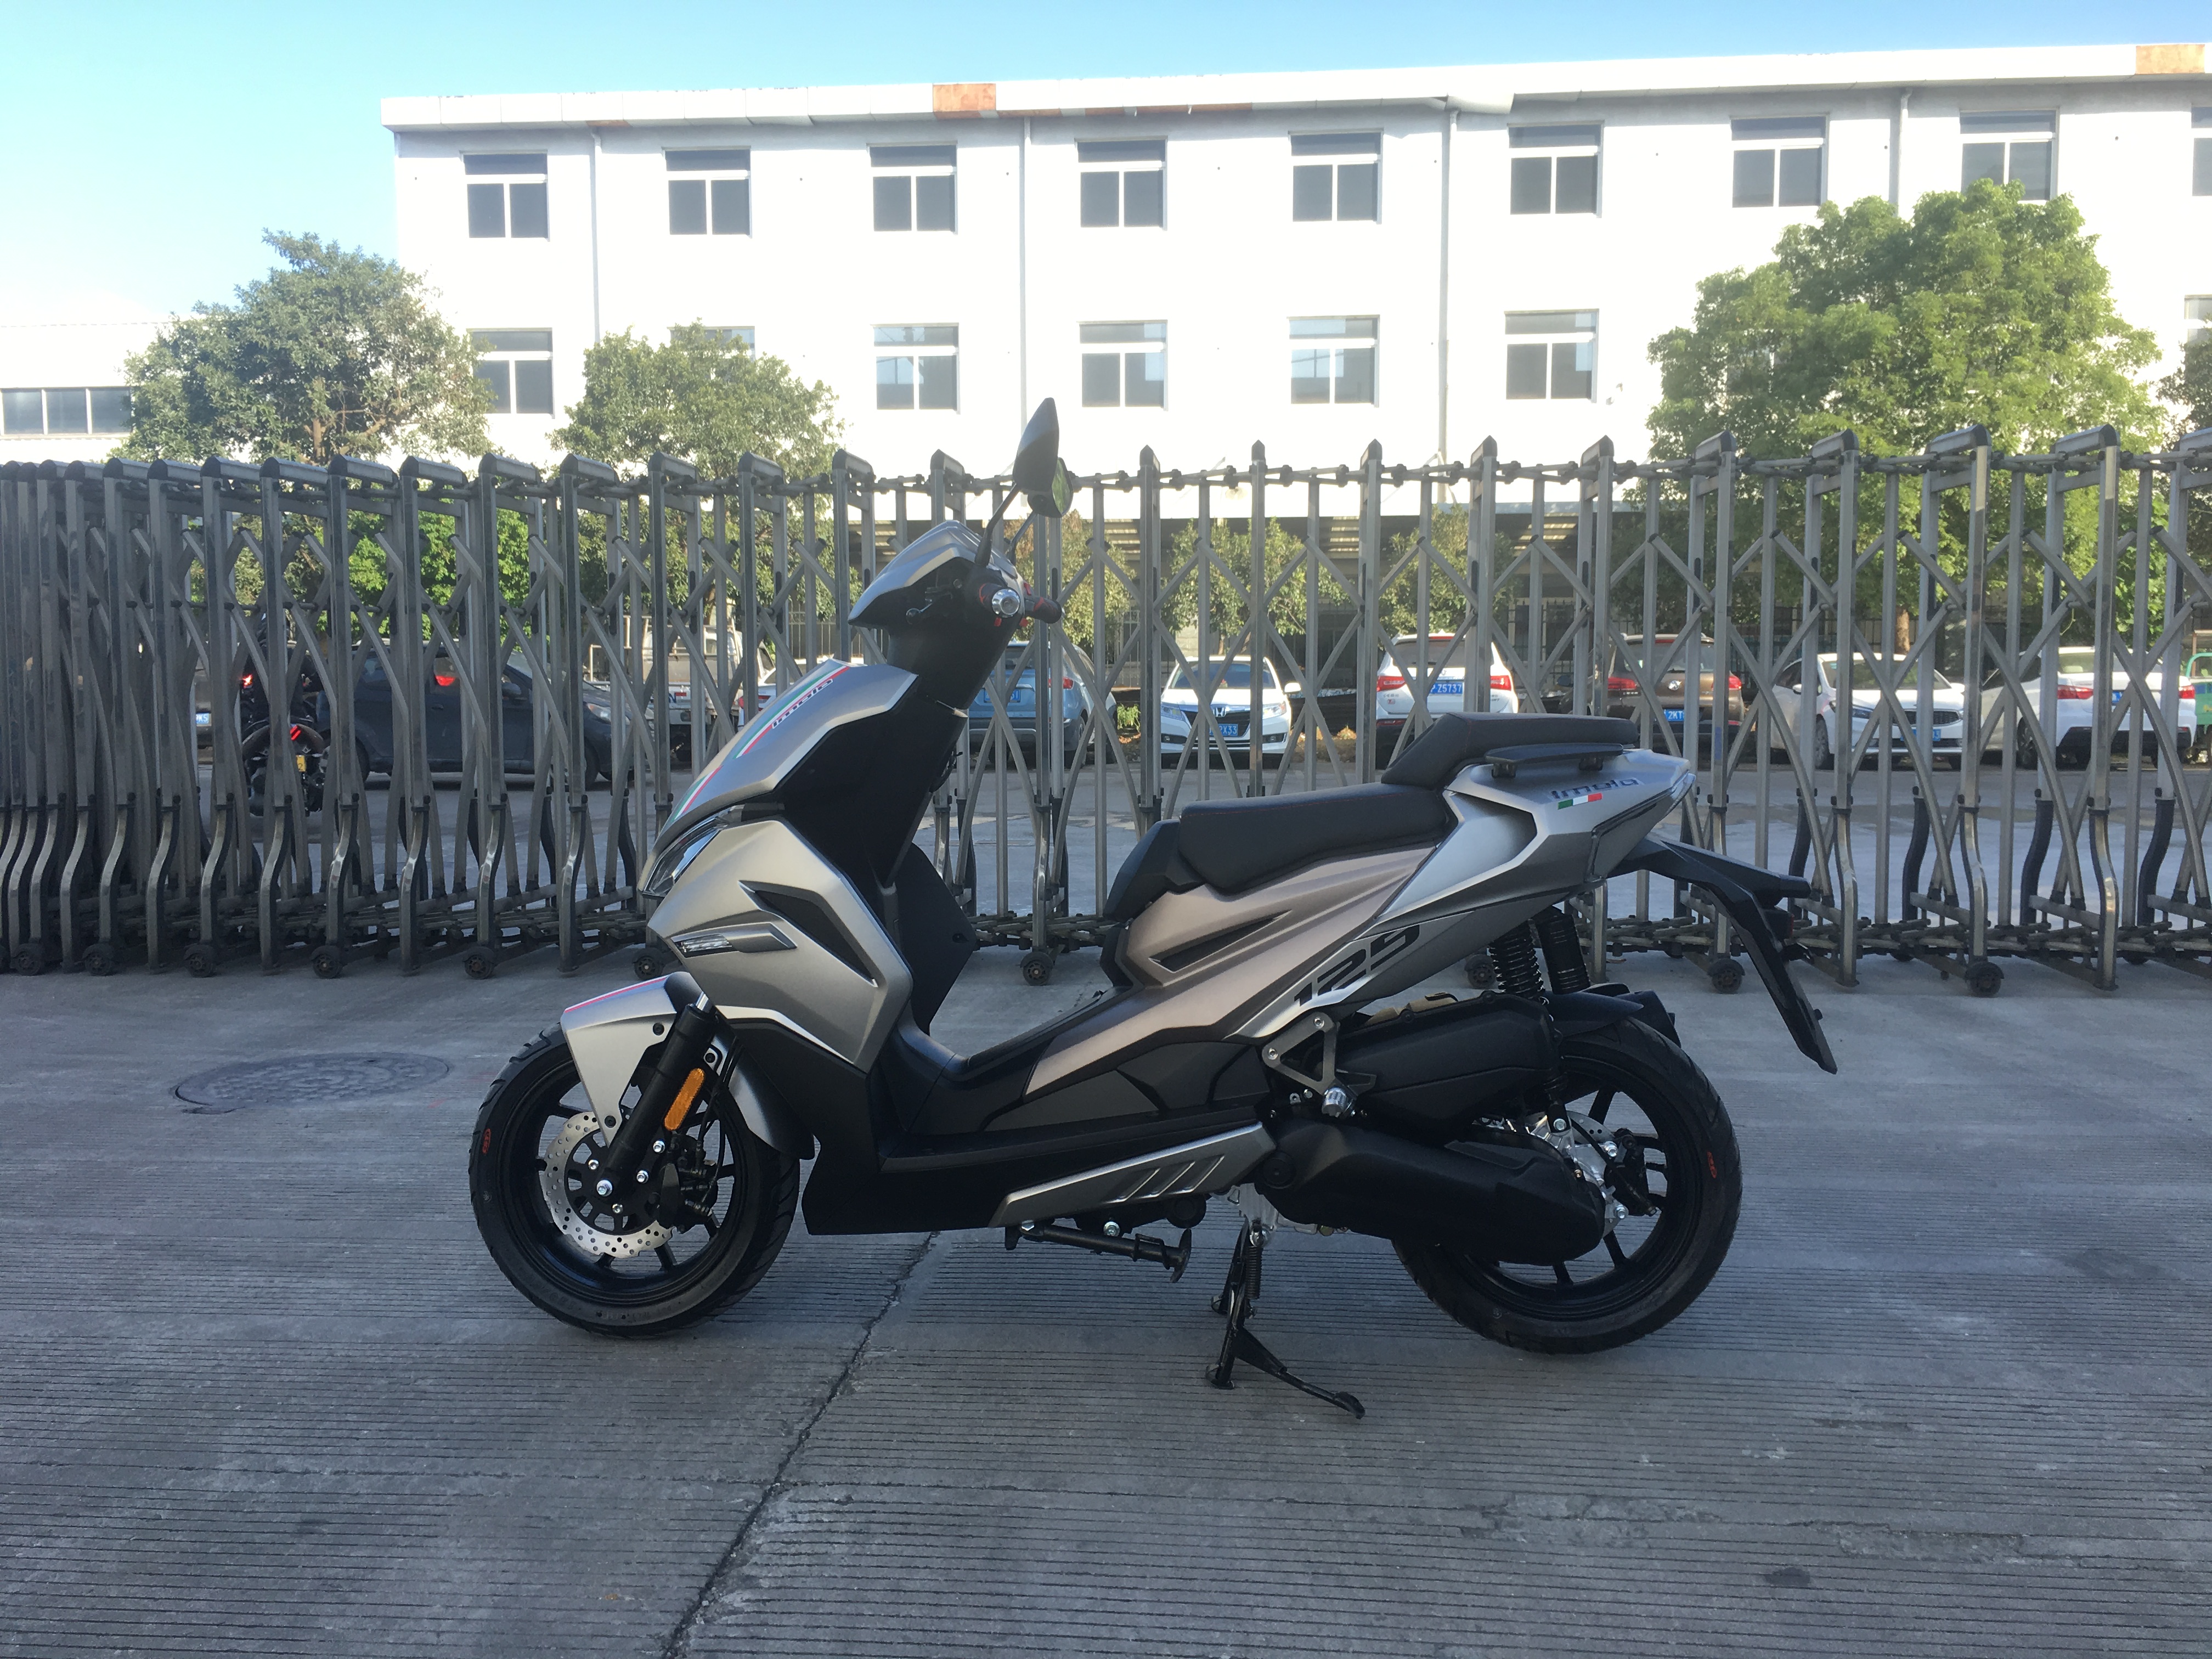 TS IMOLA50/125/150CC EEC SPORTY SCOOTER